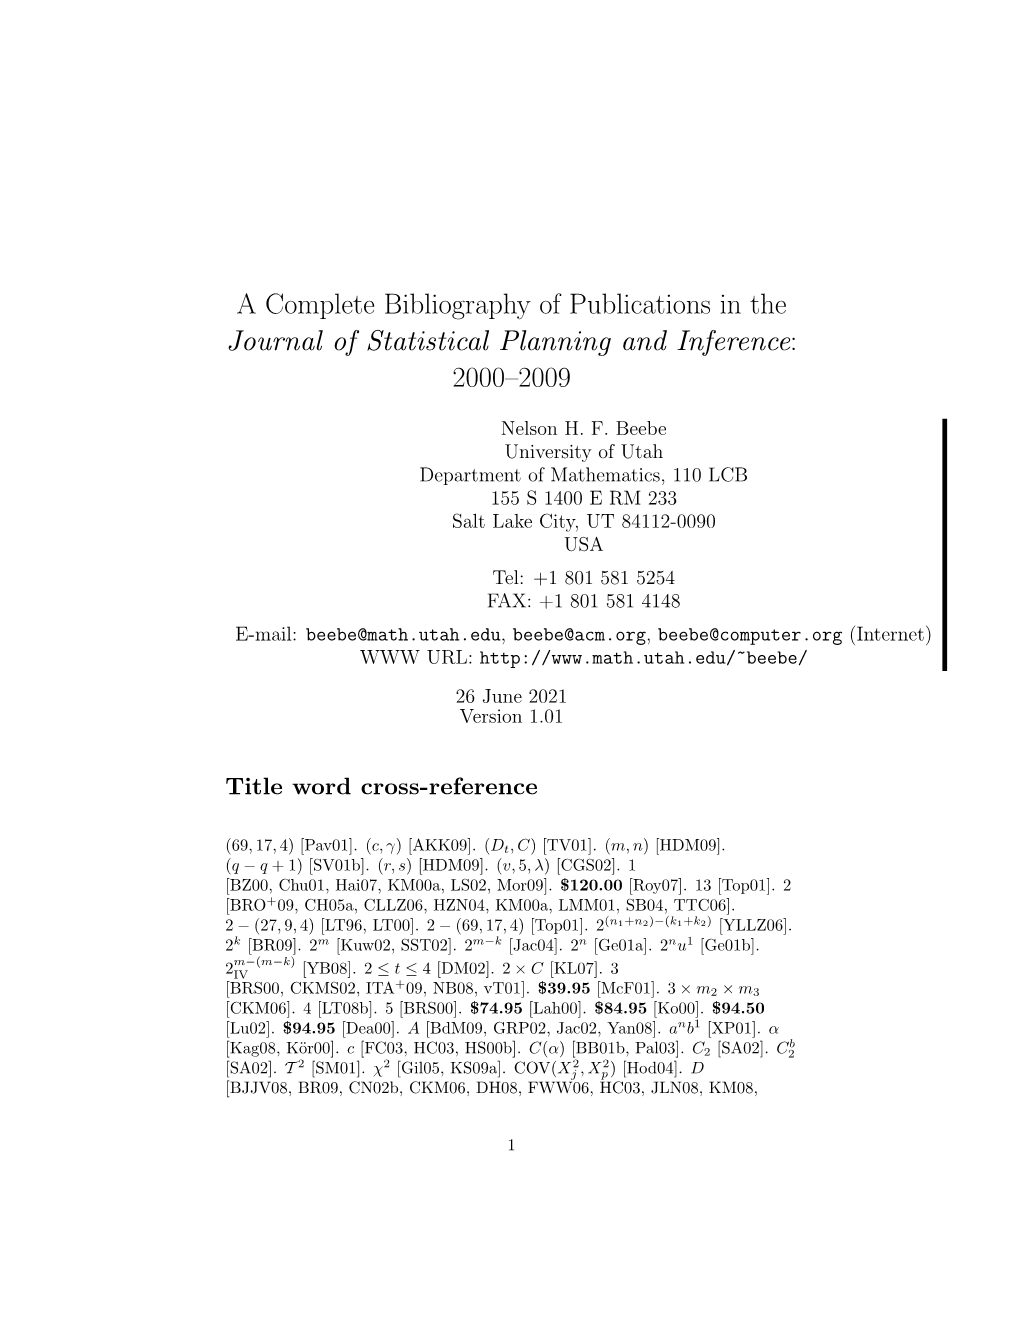 A Complete Bibliography of Publications in the Journal of Statistical Planning and Inference: 2000–2009